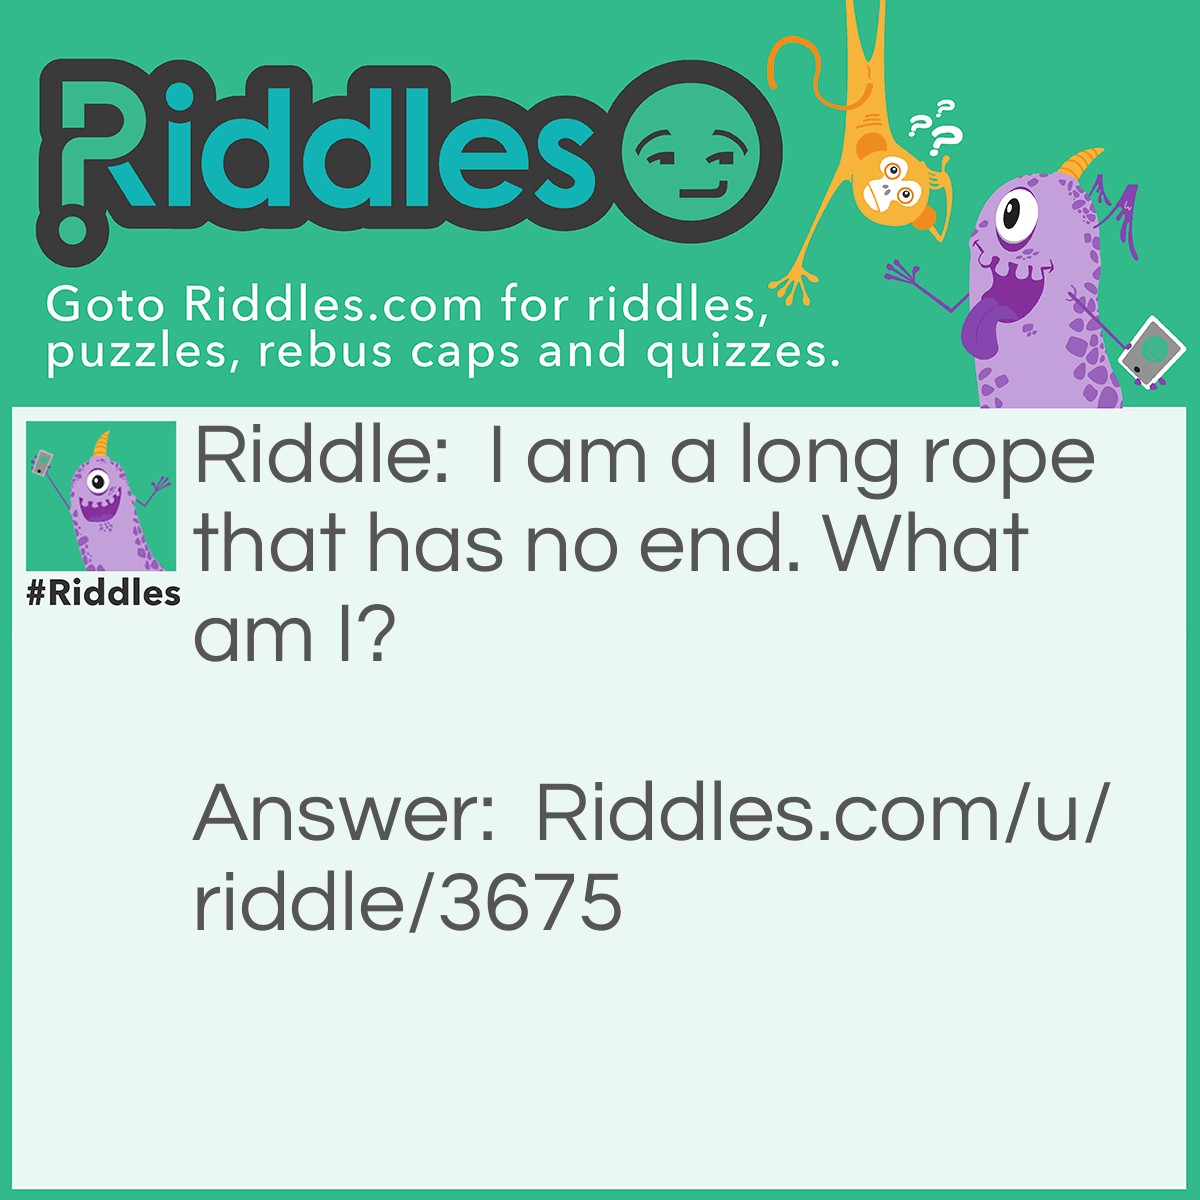 Riddle: I am a long rope that has no end. What am I? Answer: A road.